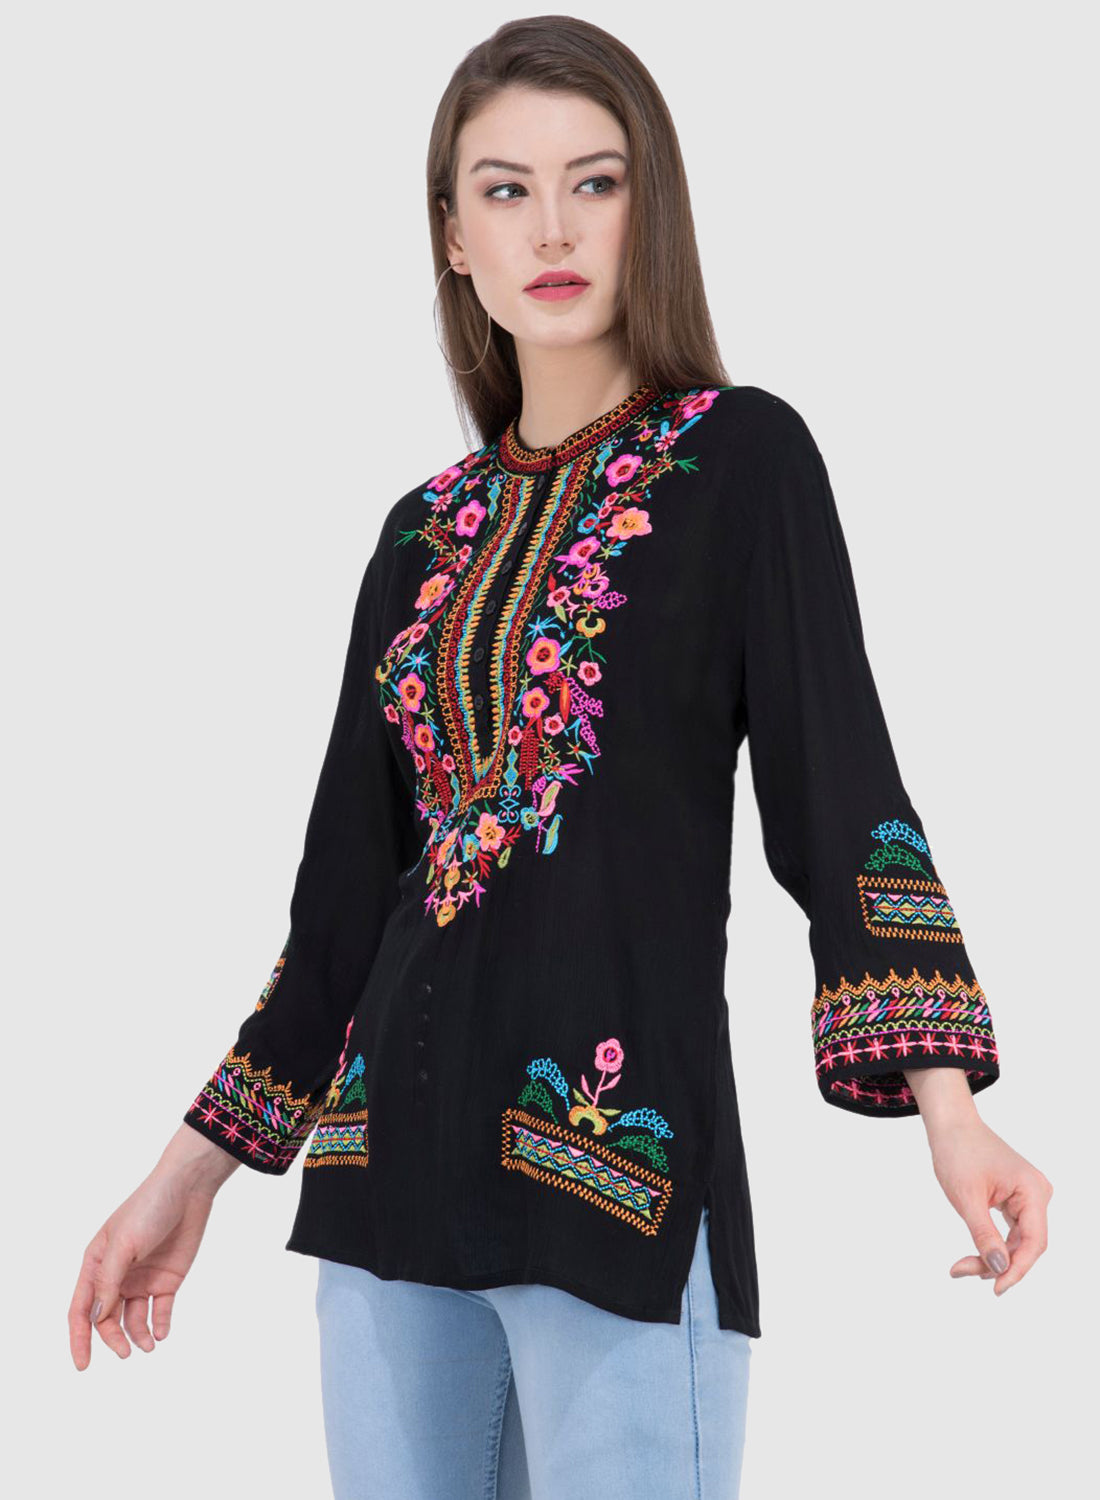 Women Top Black Rayon Crepe Party Wear 3/4 Sleeve Embroidery Work